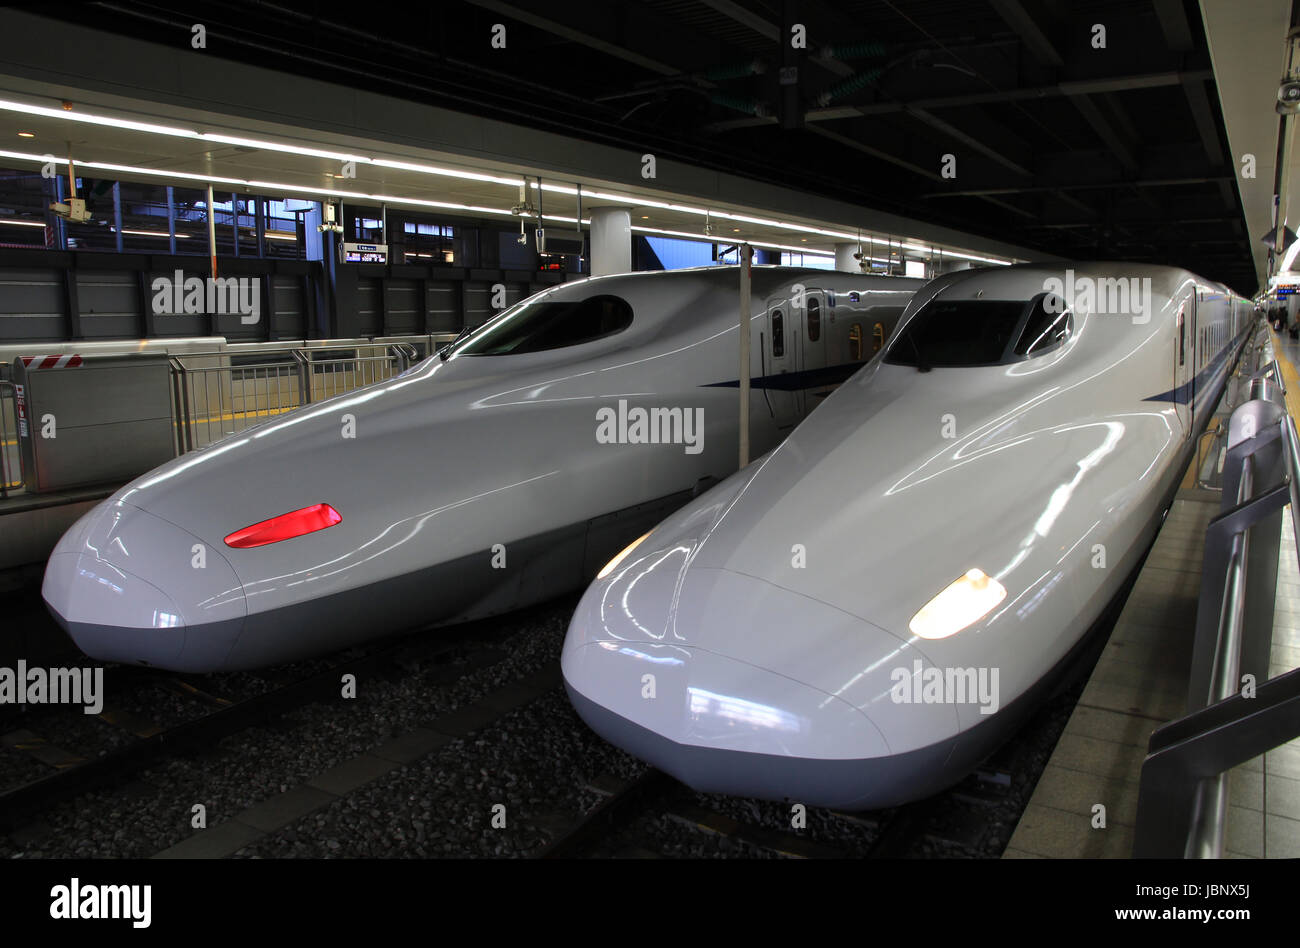 The front and rear of Shinkansen bullet trains are shown side by side at Tokyo Station, Tokyo, Japan Stock Photo